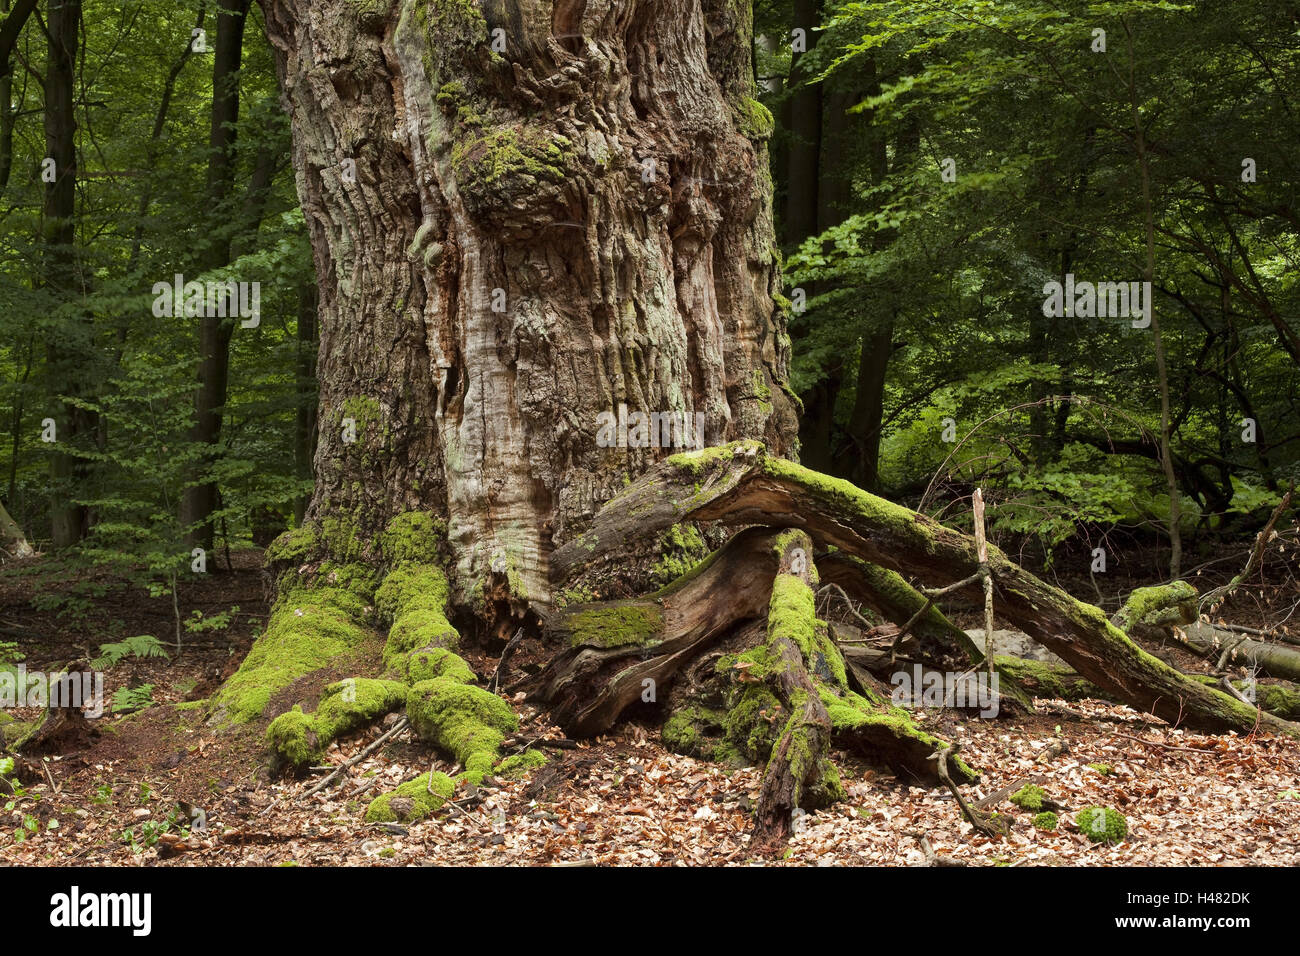 Germany, Hessen, Weser mountainous country, Reinhard's wood, primeval forest castle Saba, old trunk, Stock Photo